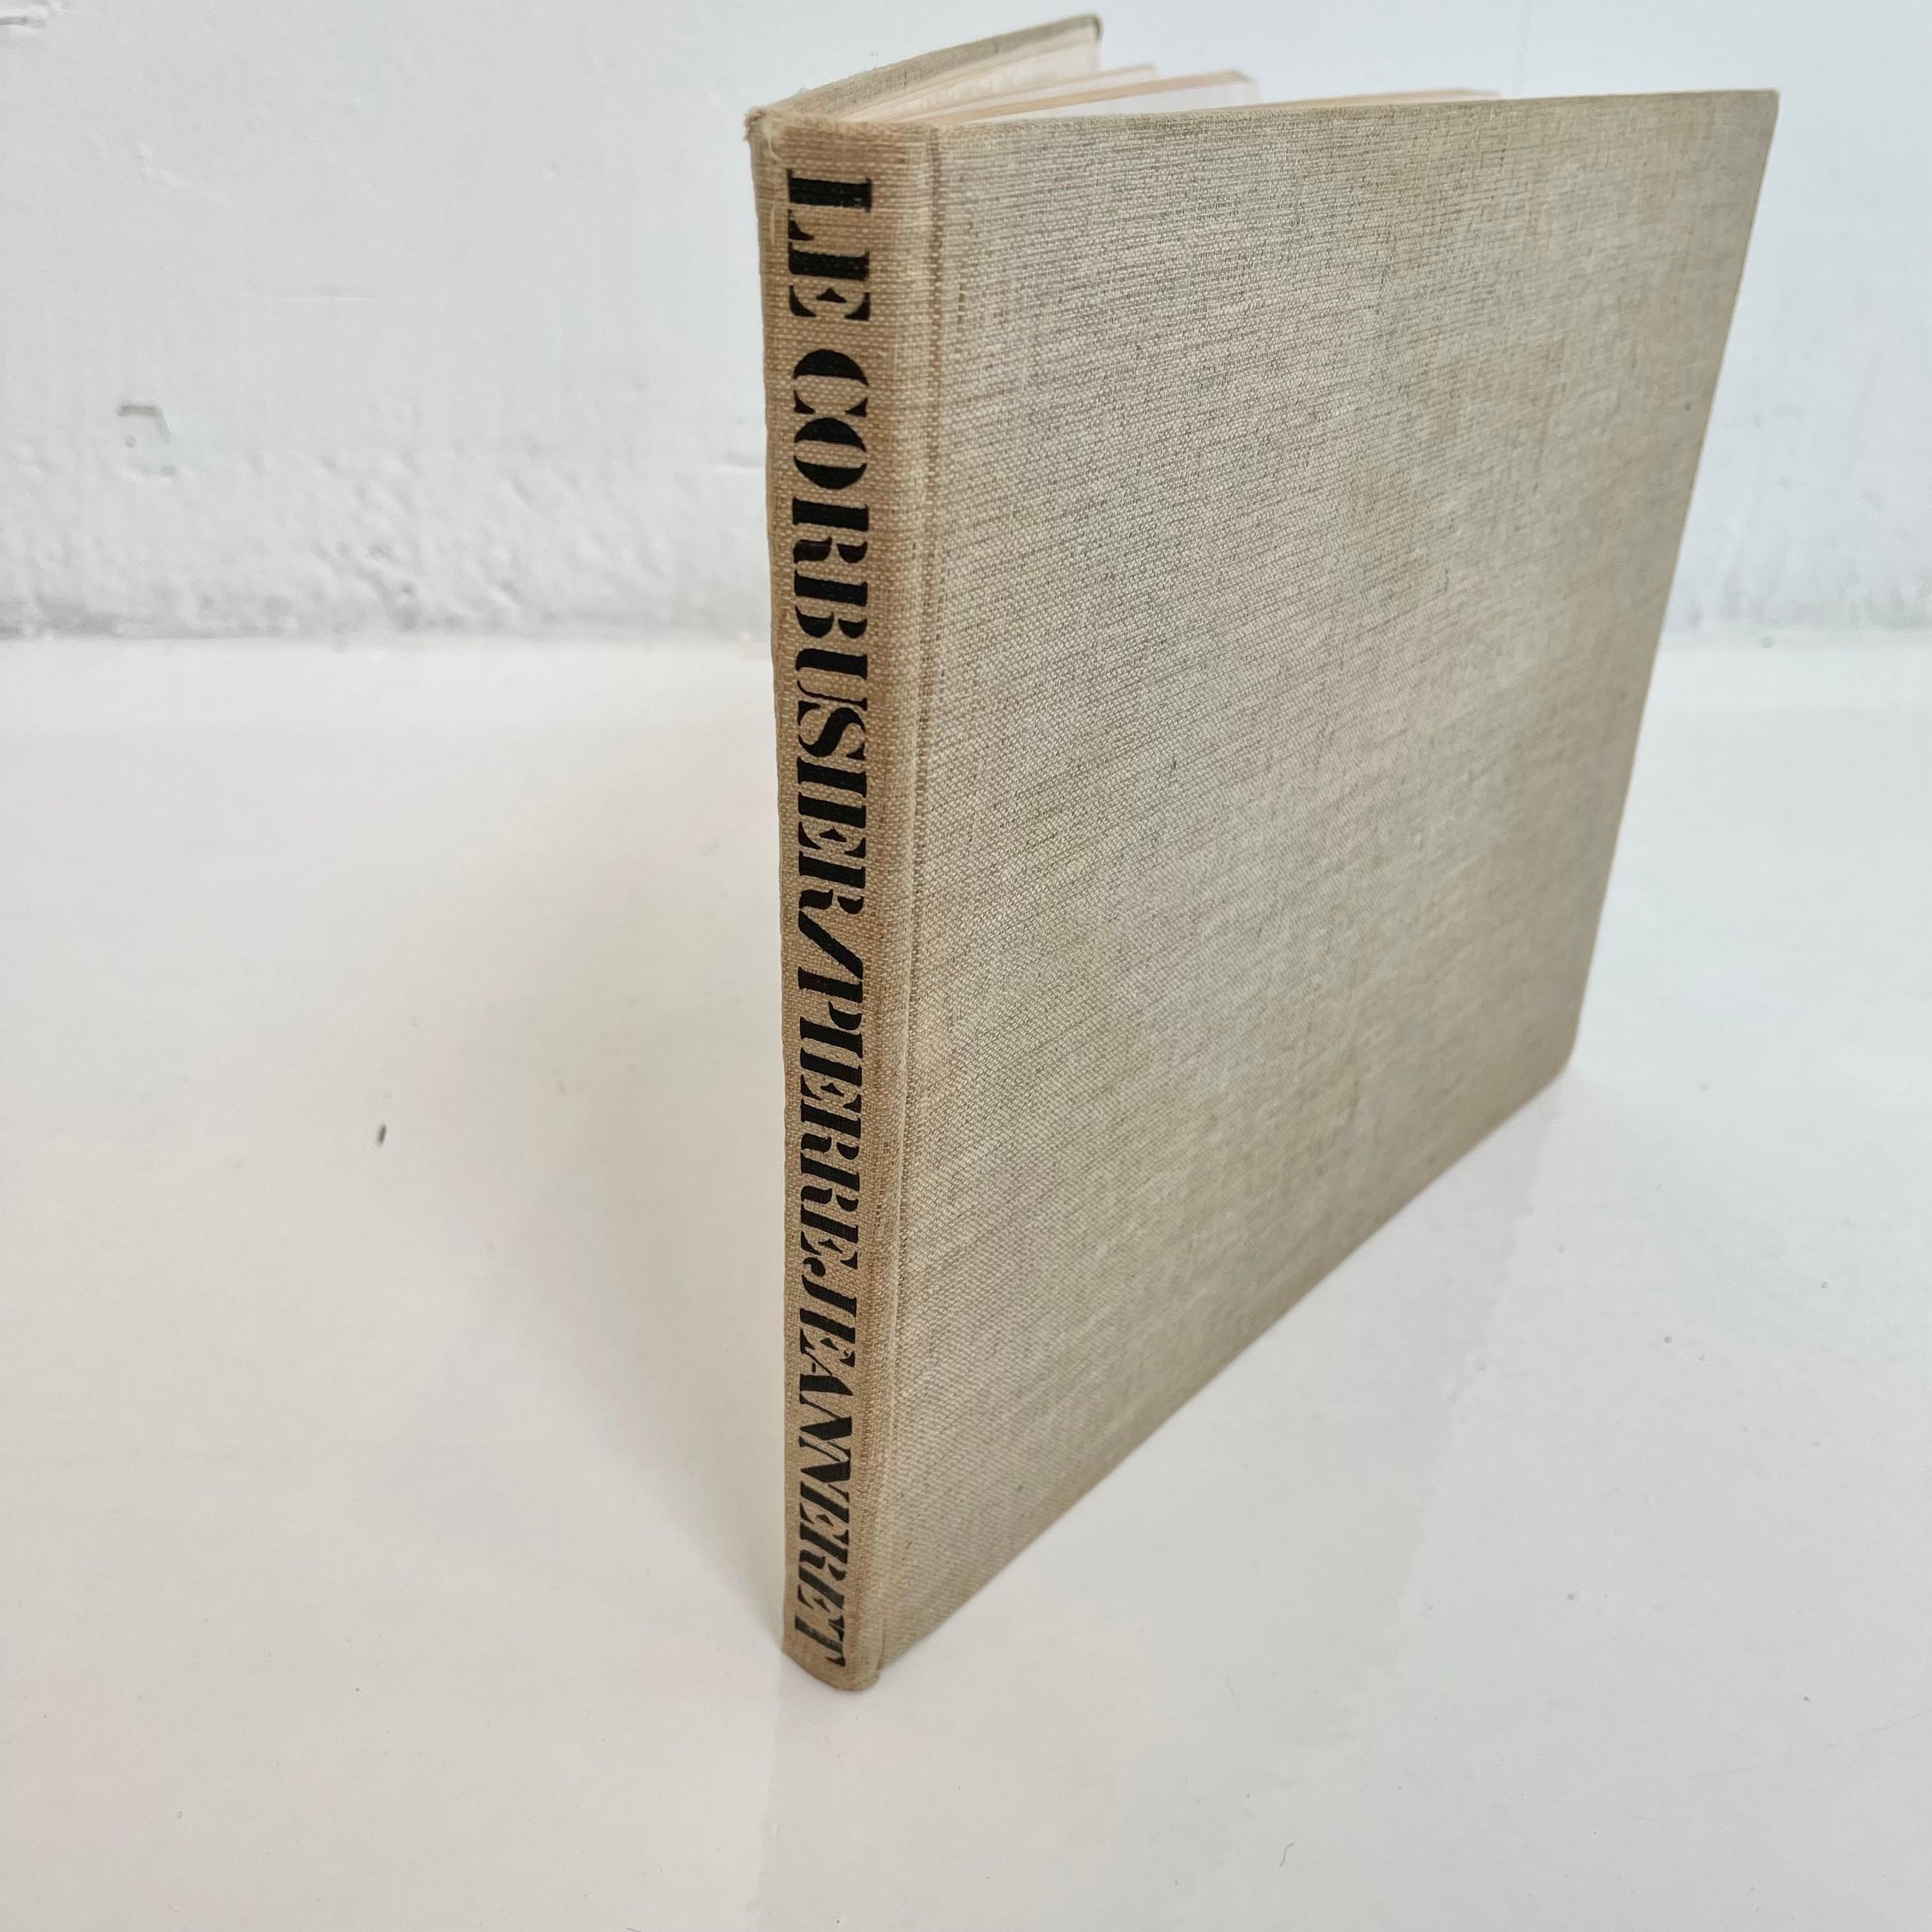 Paper Corbusier, First Edition Book 1937